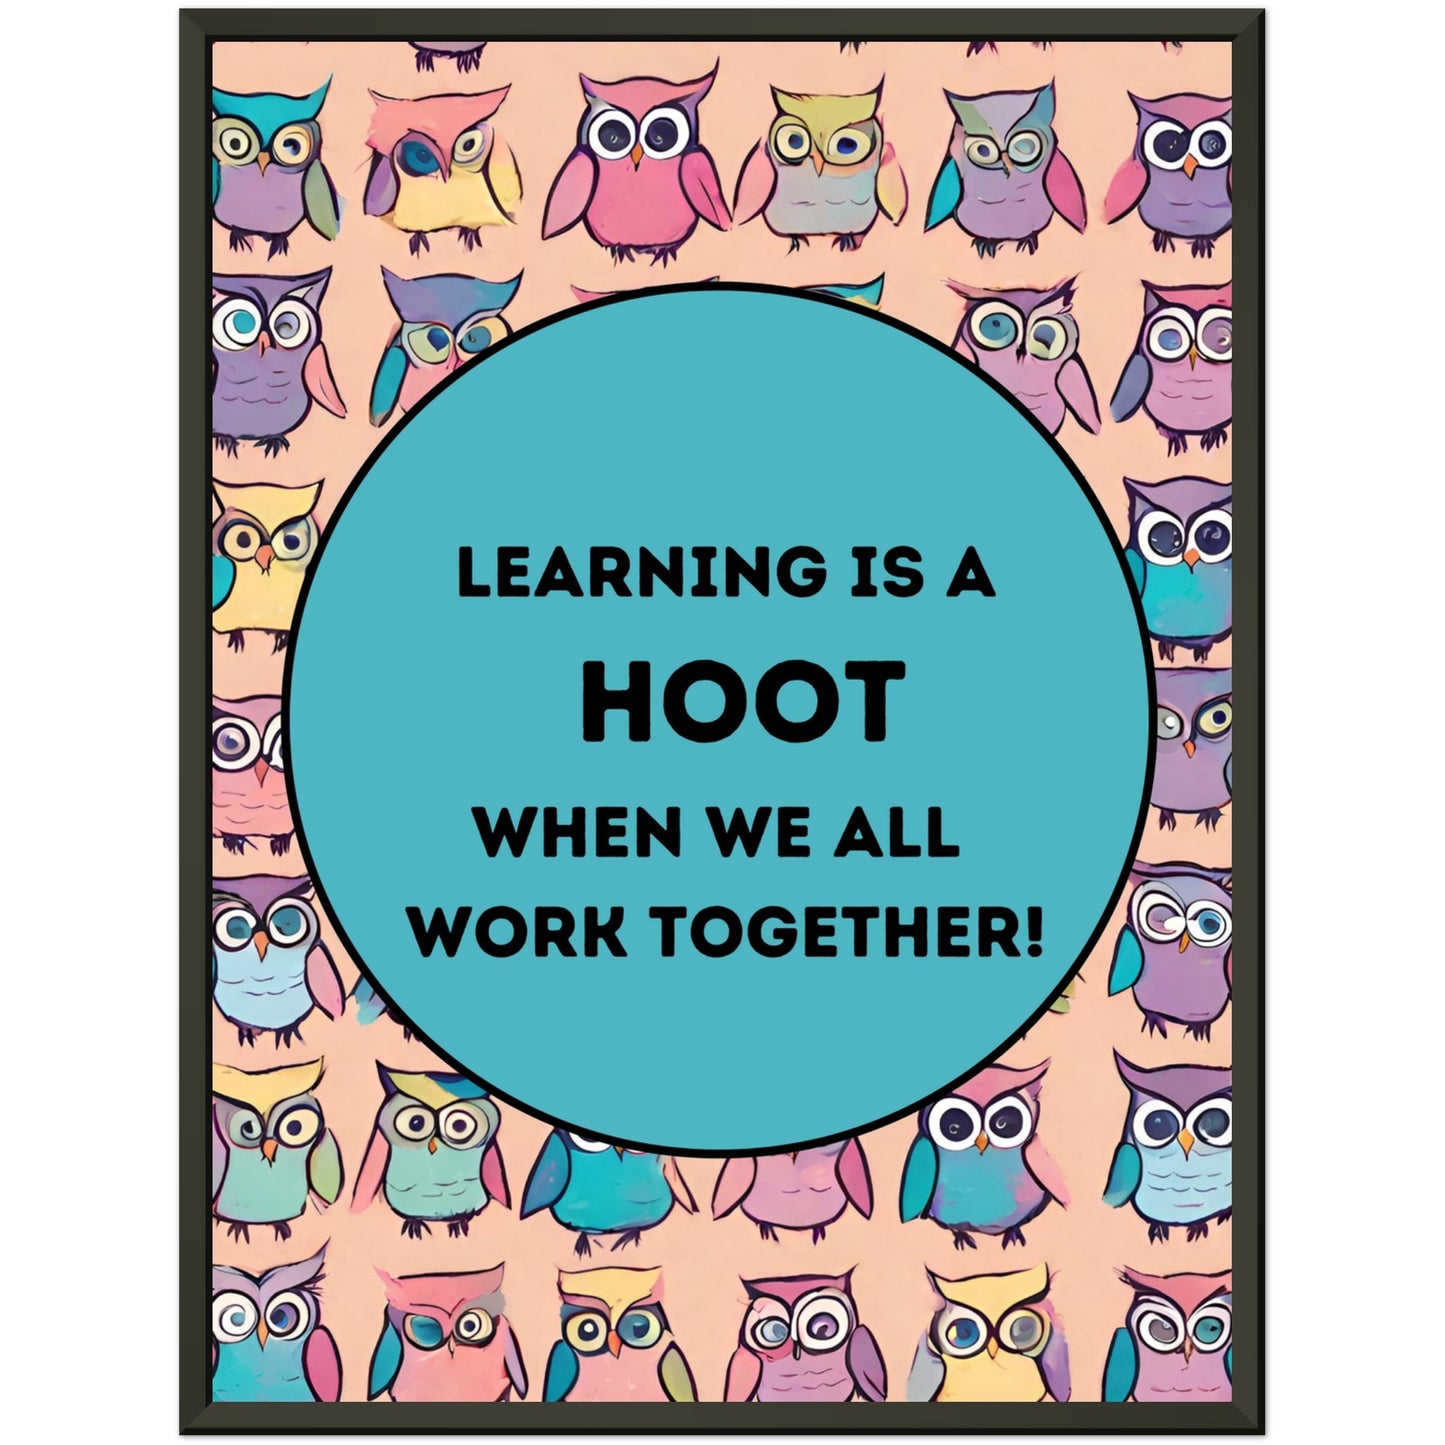 Learning is a HOOT Premium Matte Paper Metal Framed Poster